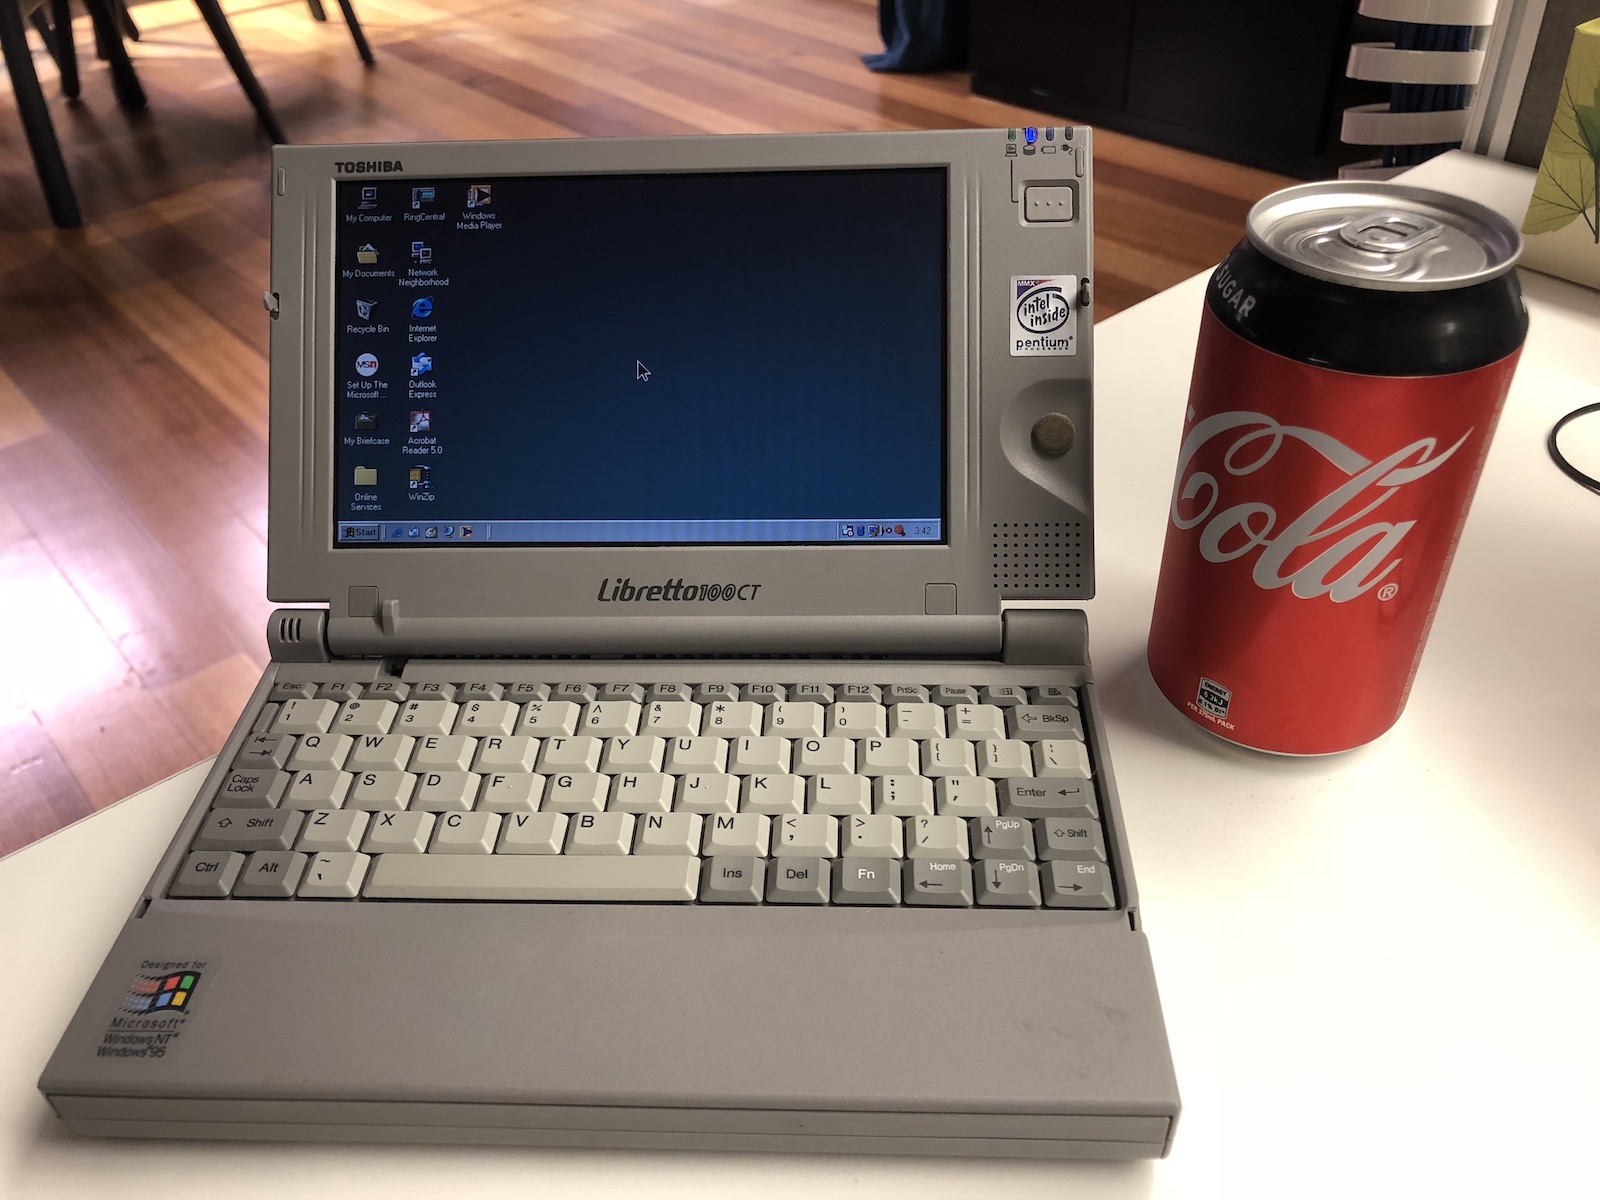 Toshiba Libretto with a Coca Cola can sitting next to it